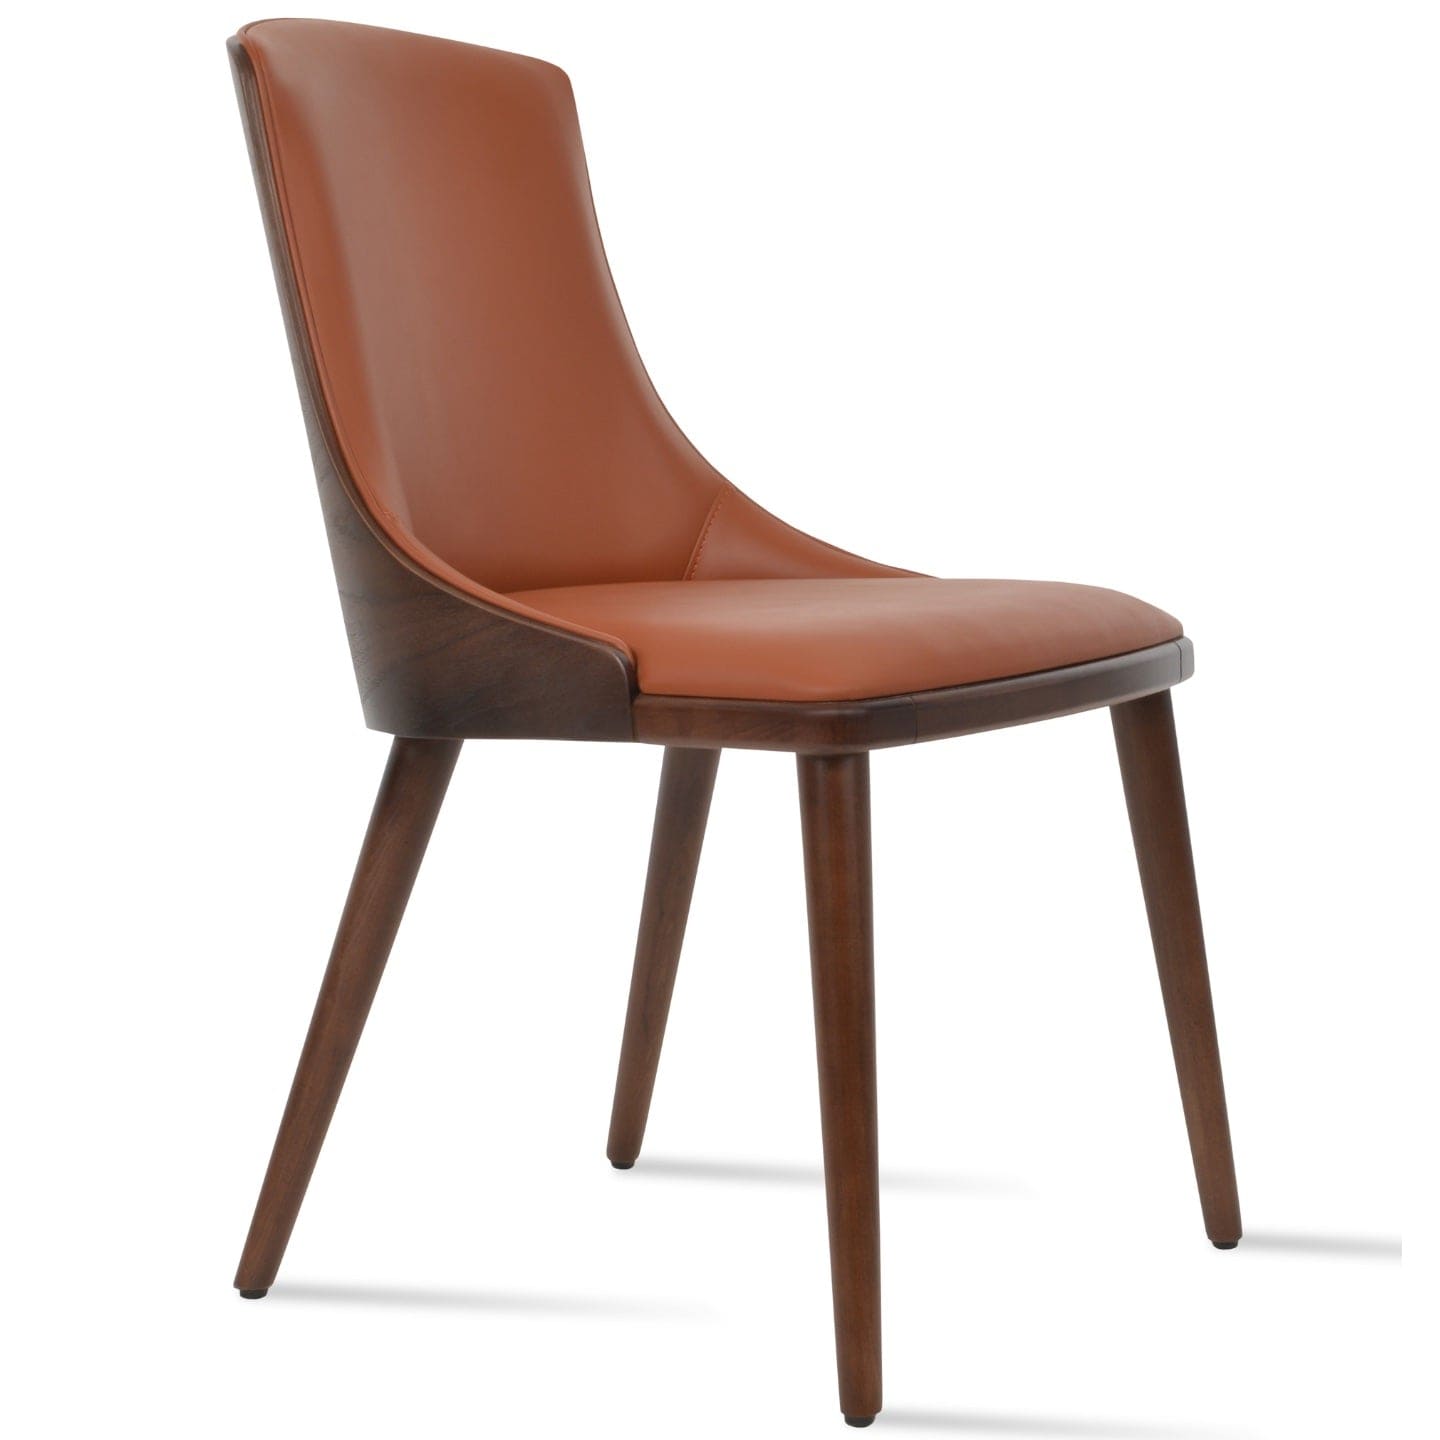 sohoConcept Kitchen & Dining Room Chairs RomanoW Wood Dining Chair | Black Leather Parsons Chair